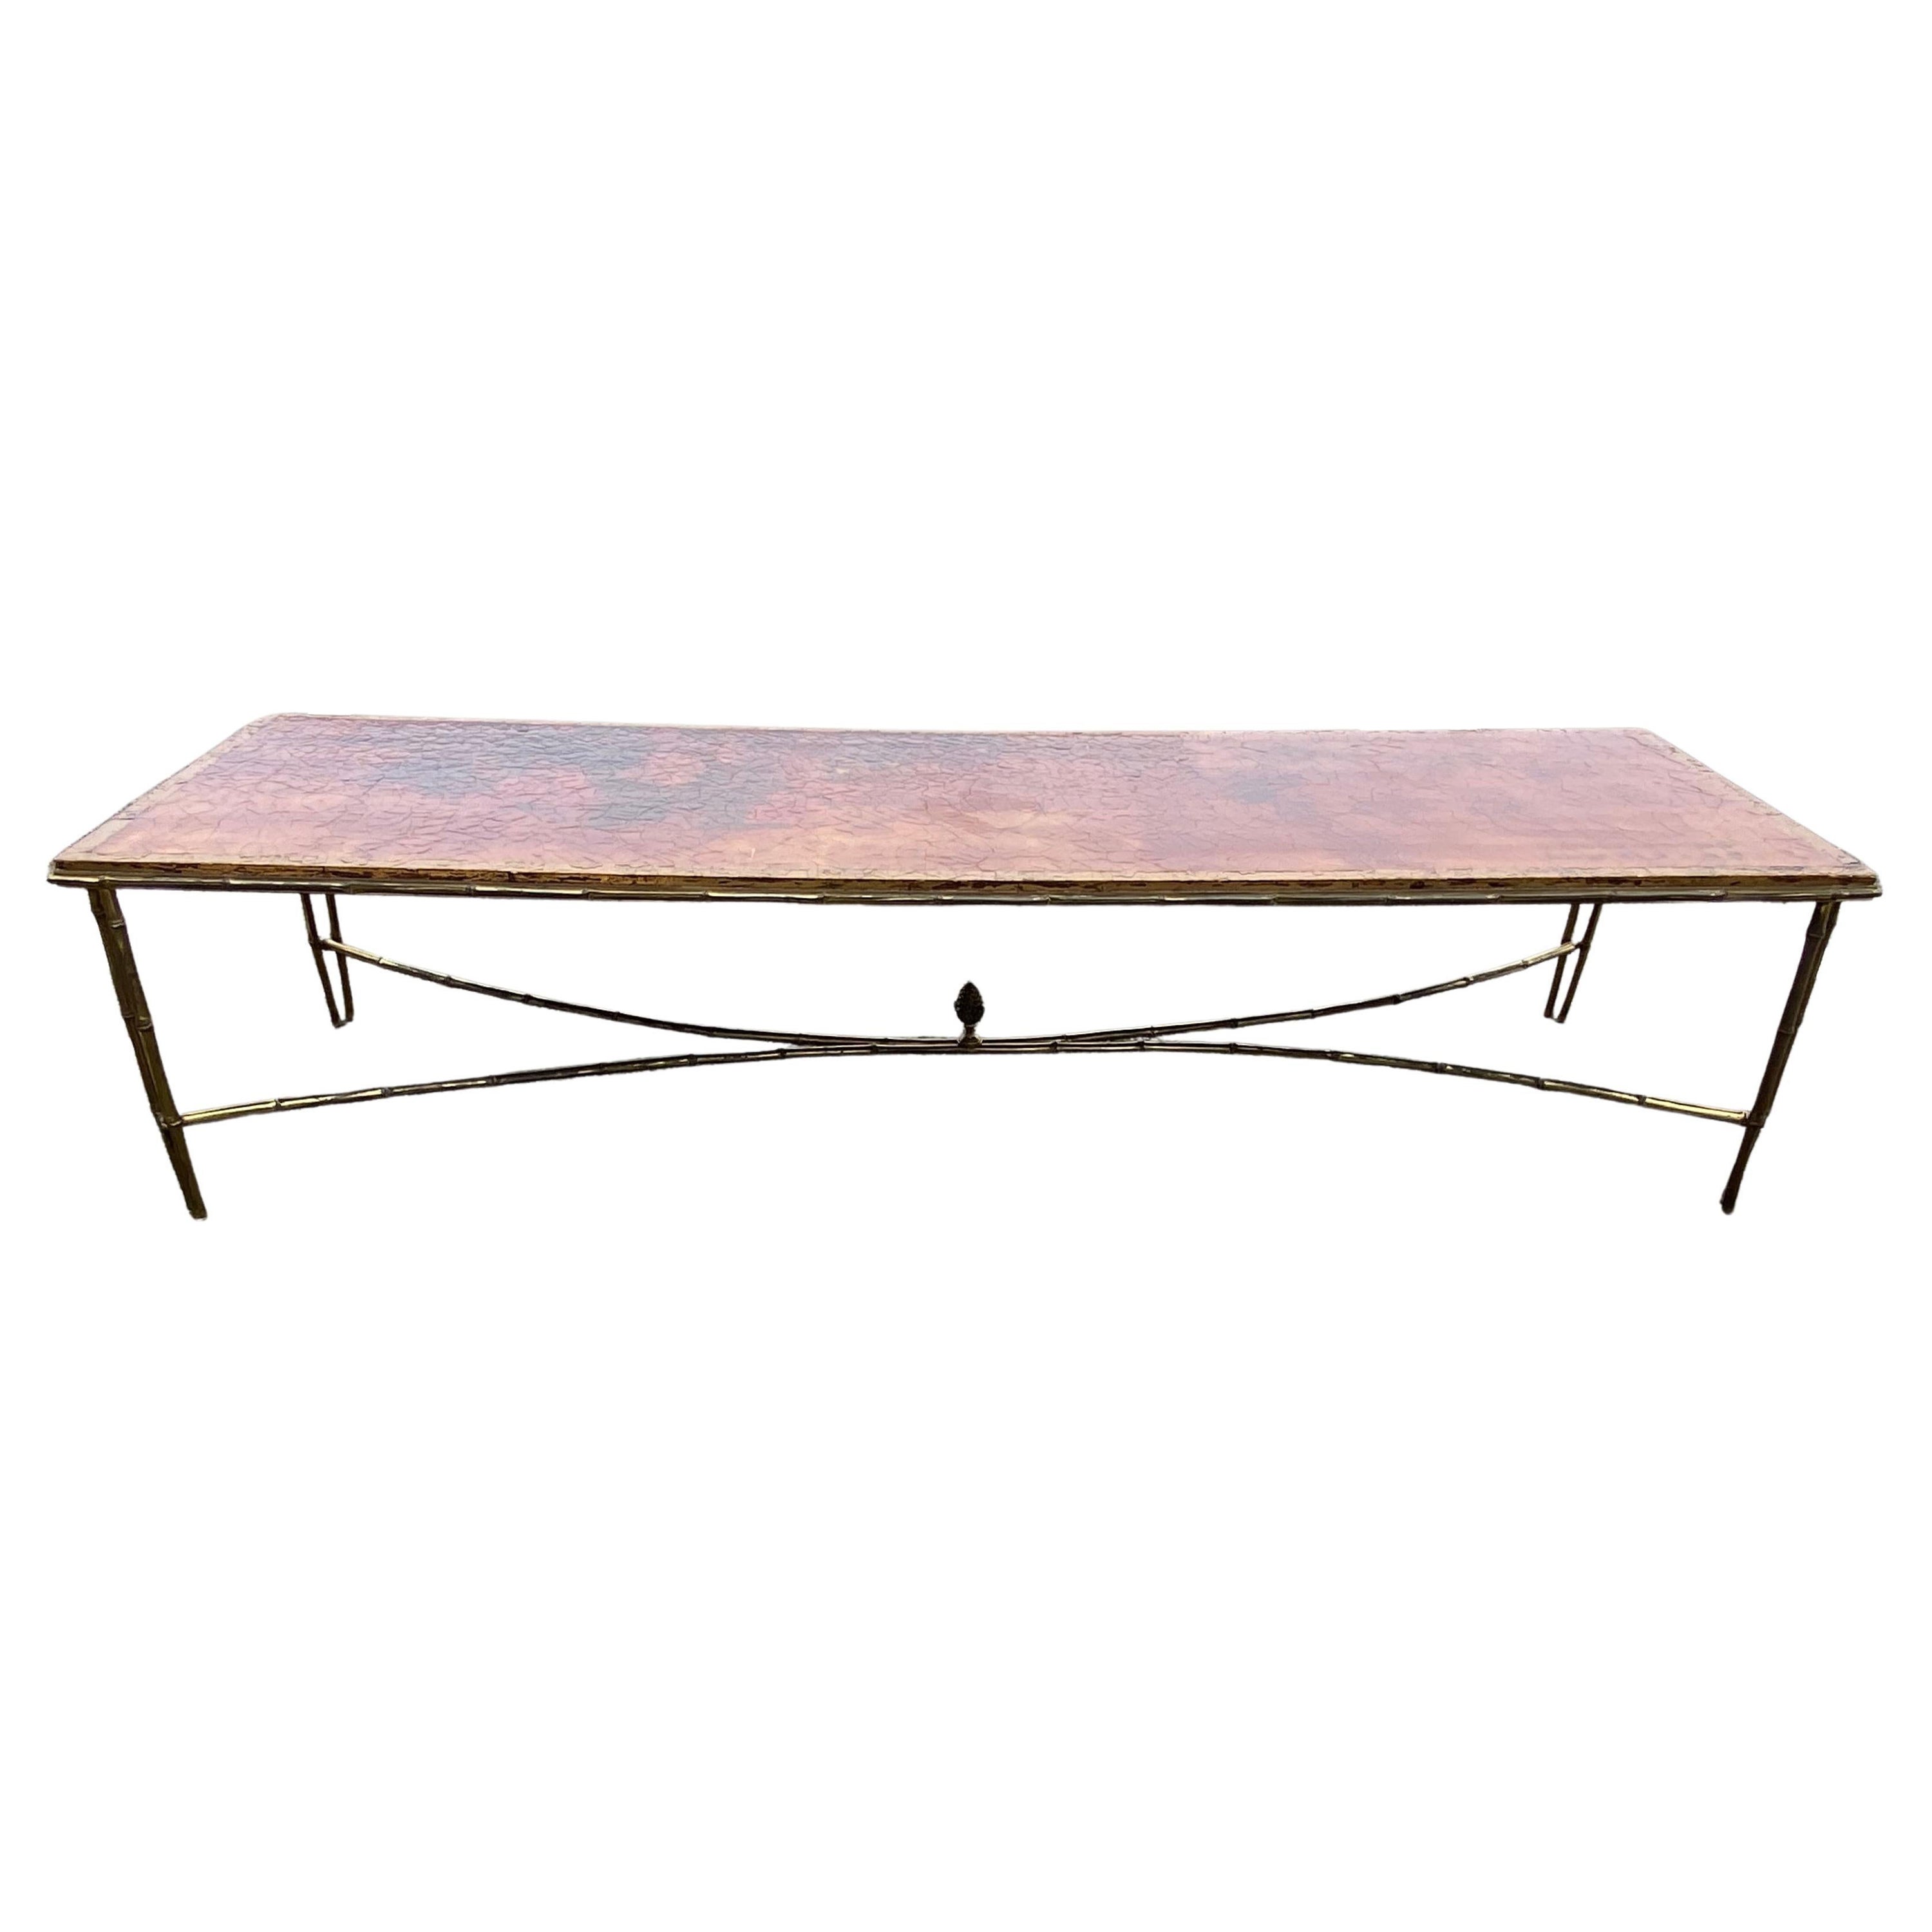 1970 ‘Coffee Table Bronze Bamboo Model Maison Baguès Chinese Lacquer 168 X 65 cm